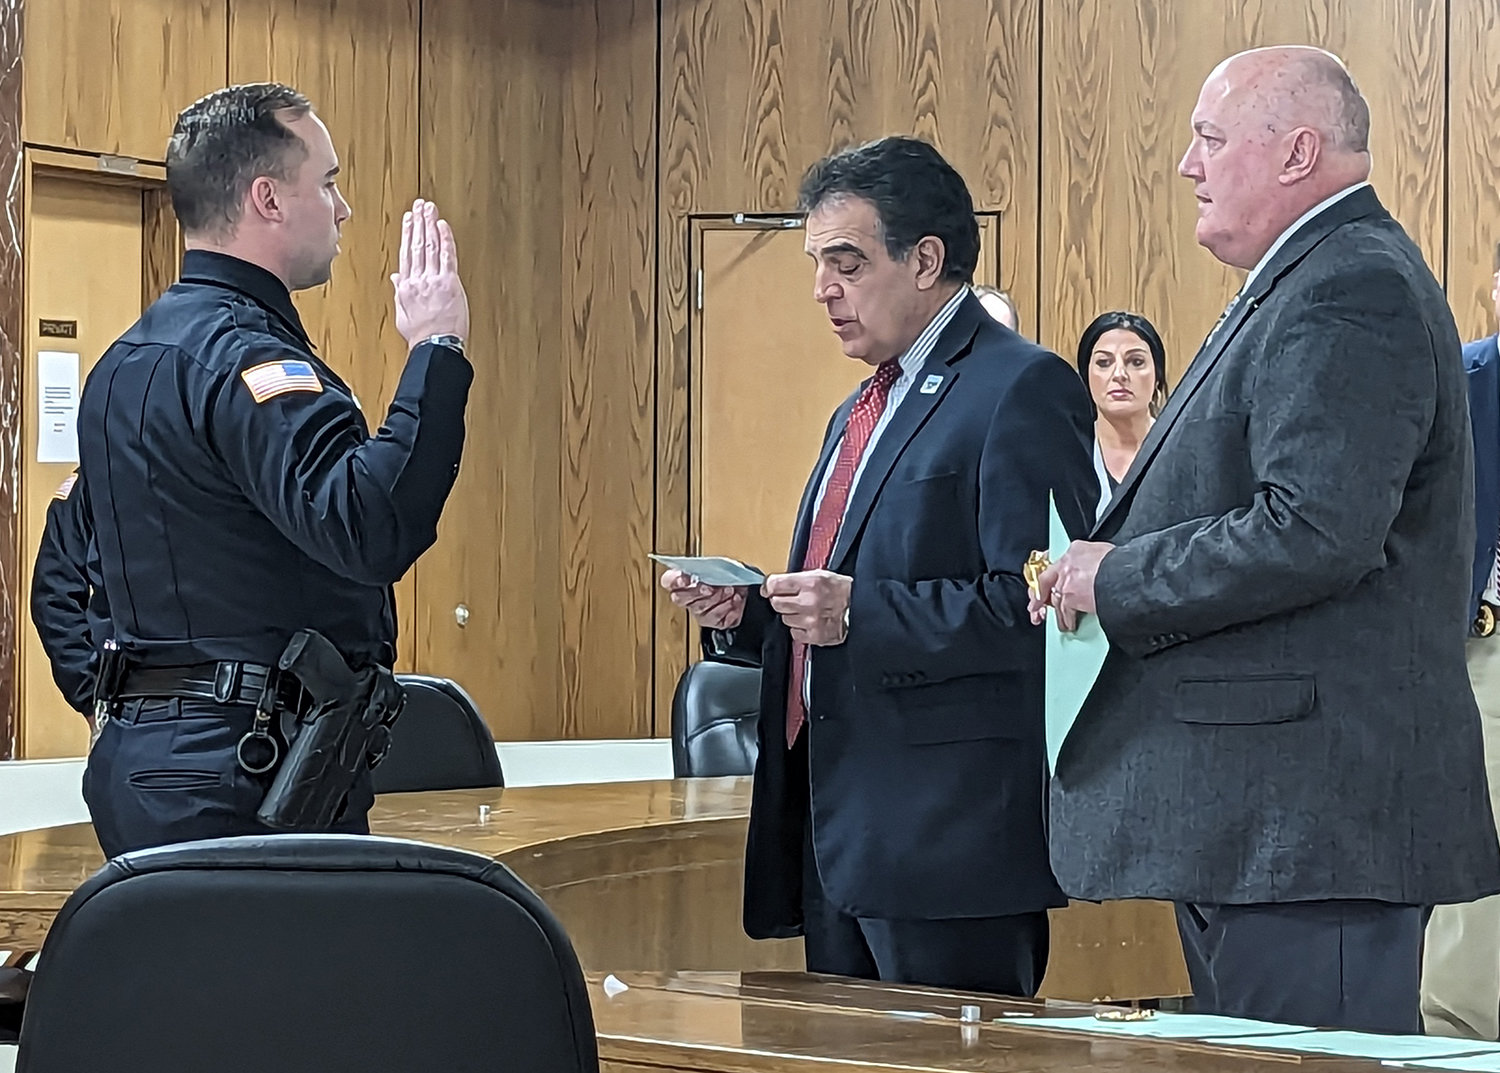 Joshua Austin takes the oath of office in his promotion to sergeant with the Utica Police Department. Utica Mayor Robert Palmieri delivered with oath, alongside Chief mark Williams, at Utica City Hall on Friday.